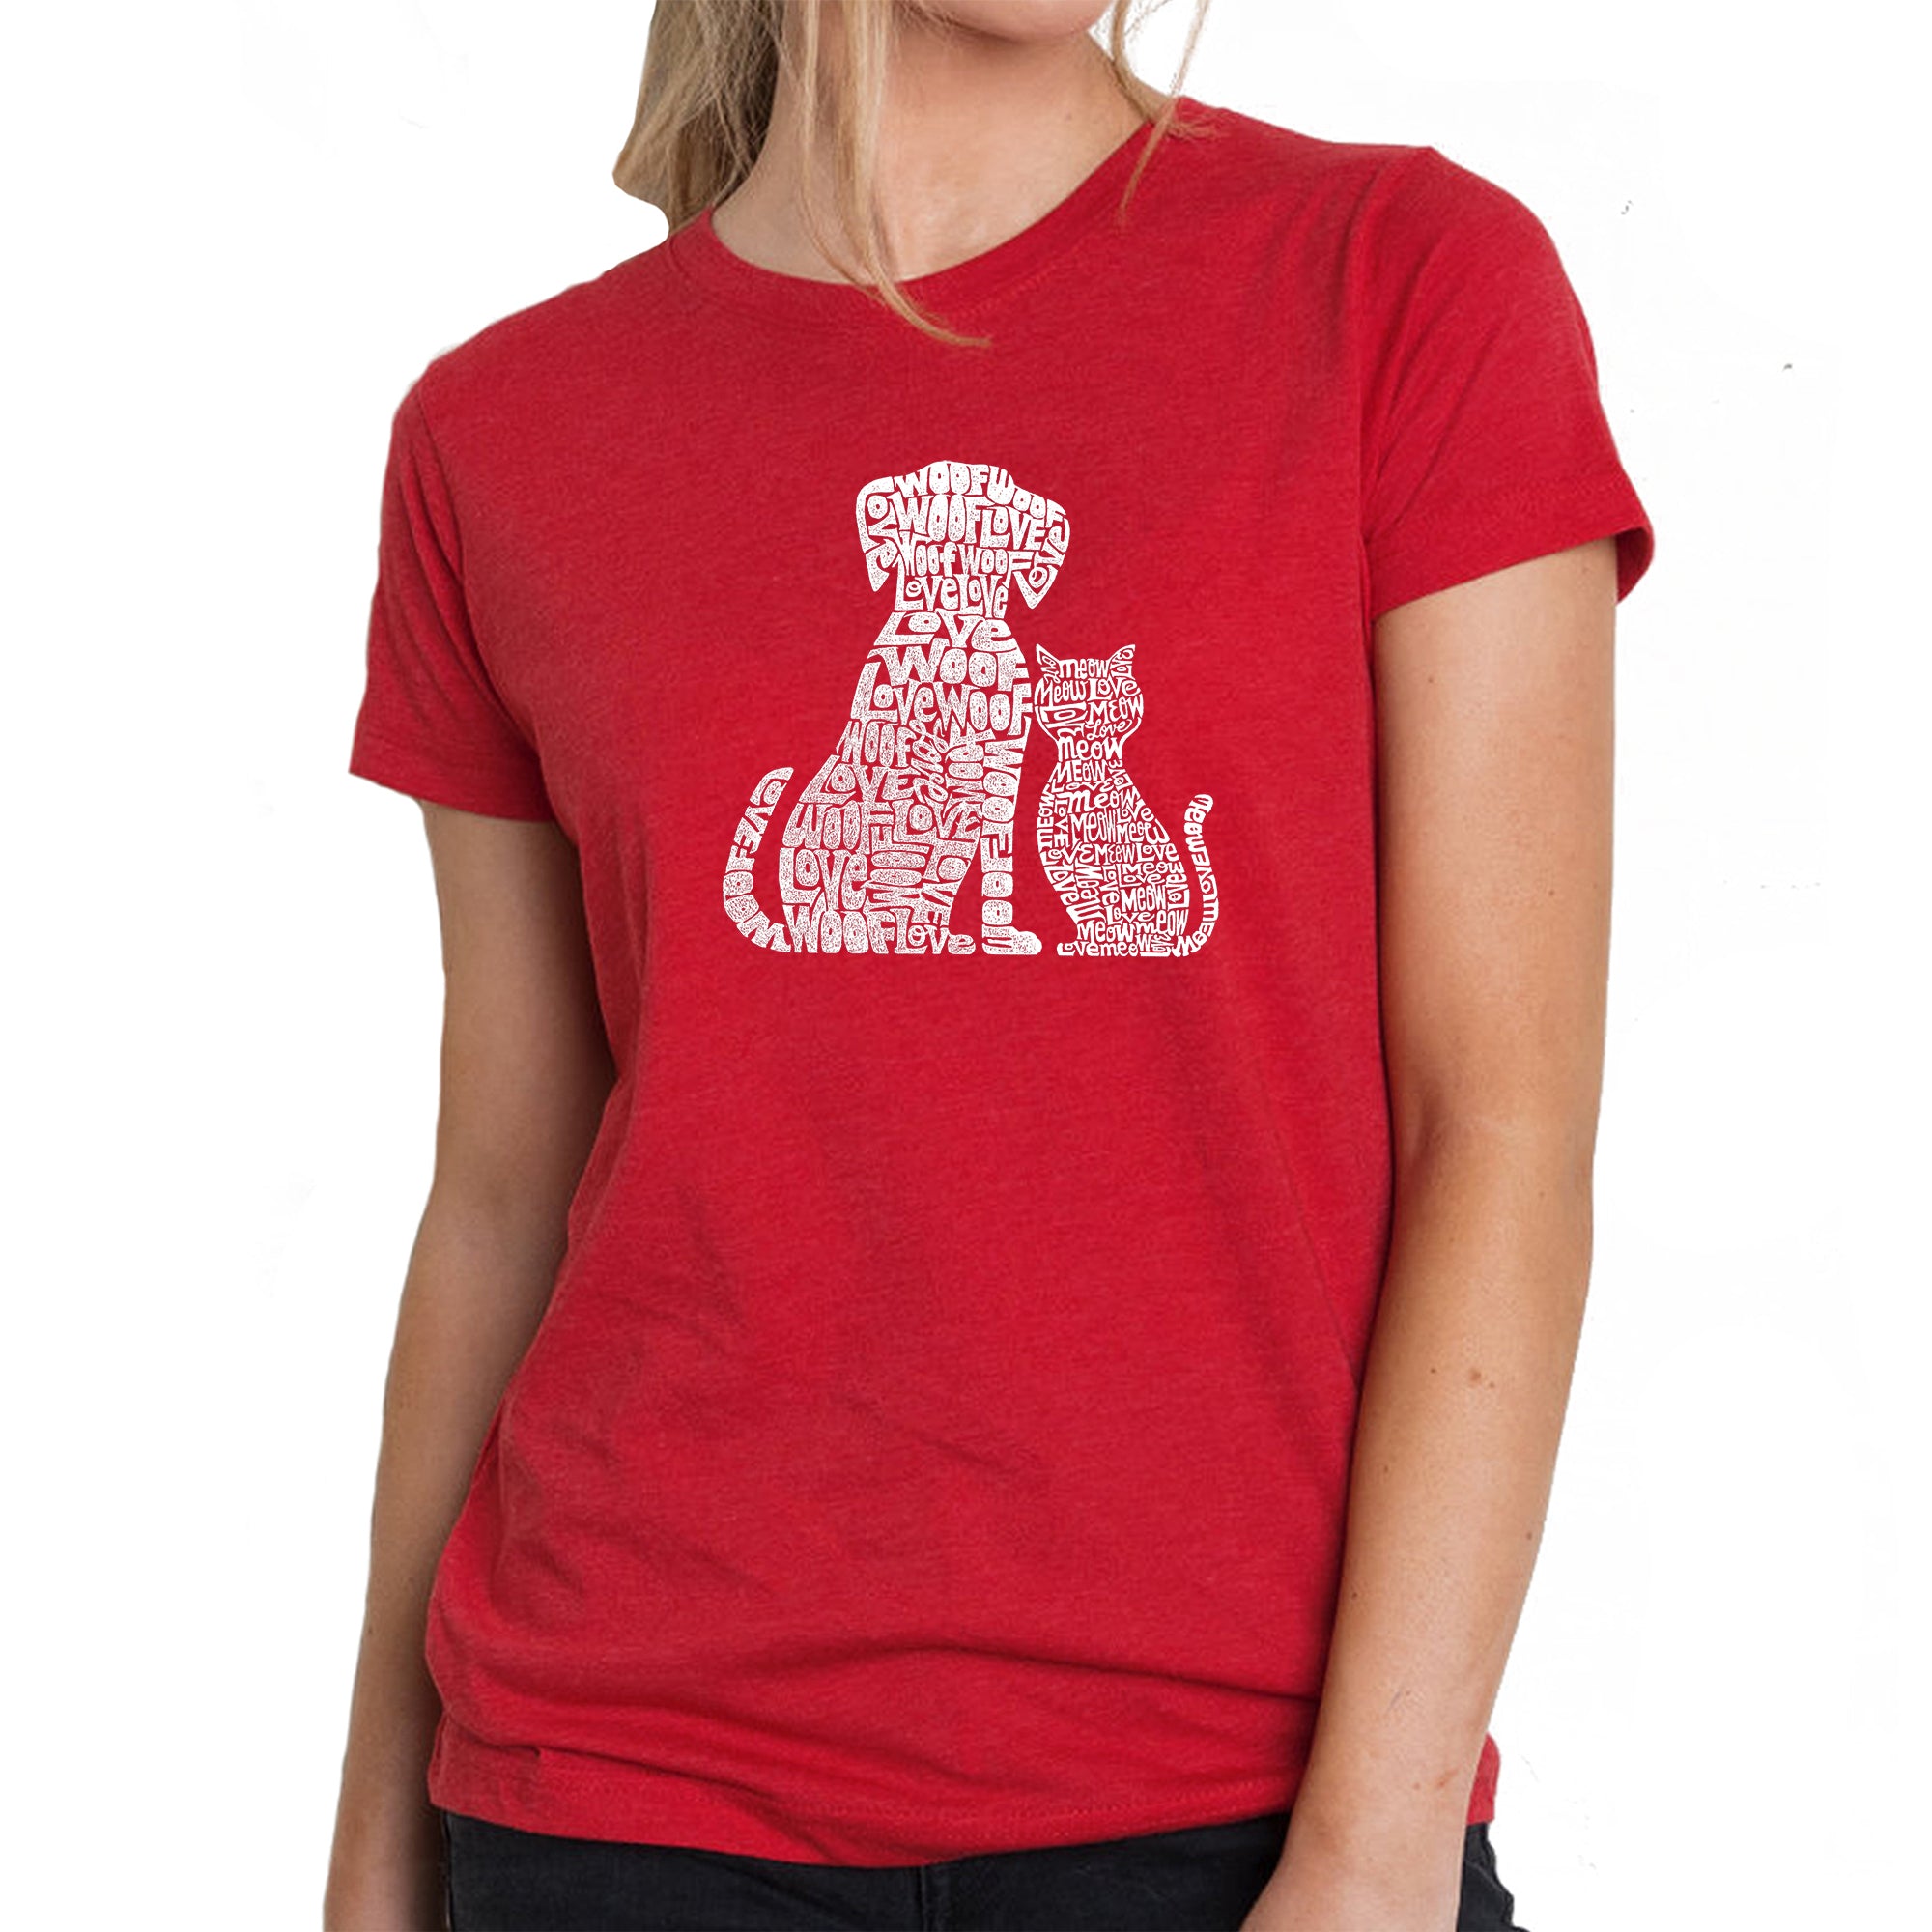 Dogs And Cats - Women's Premium Blend Word Art T-Shirt - Red - Large